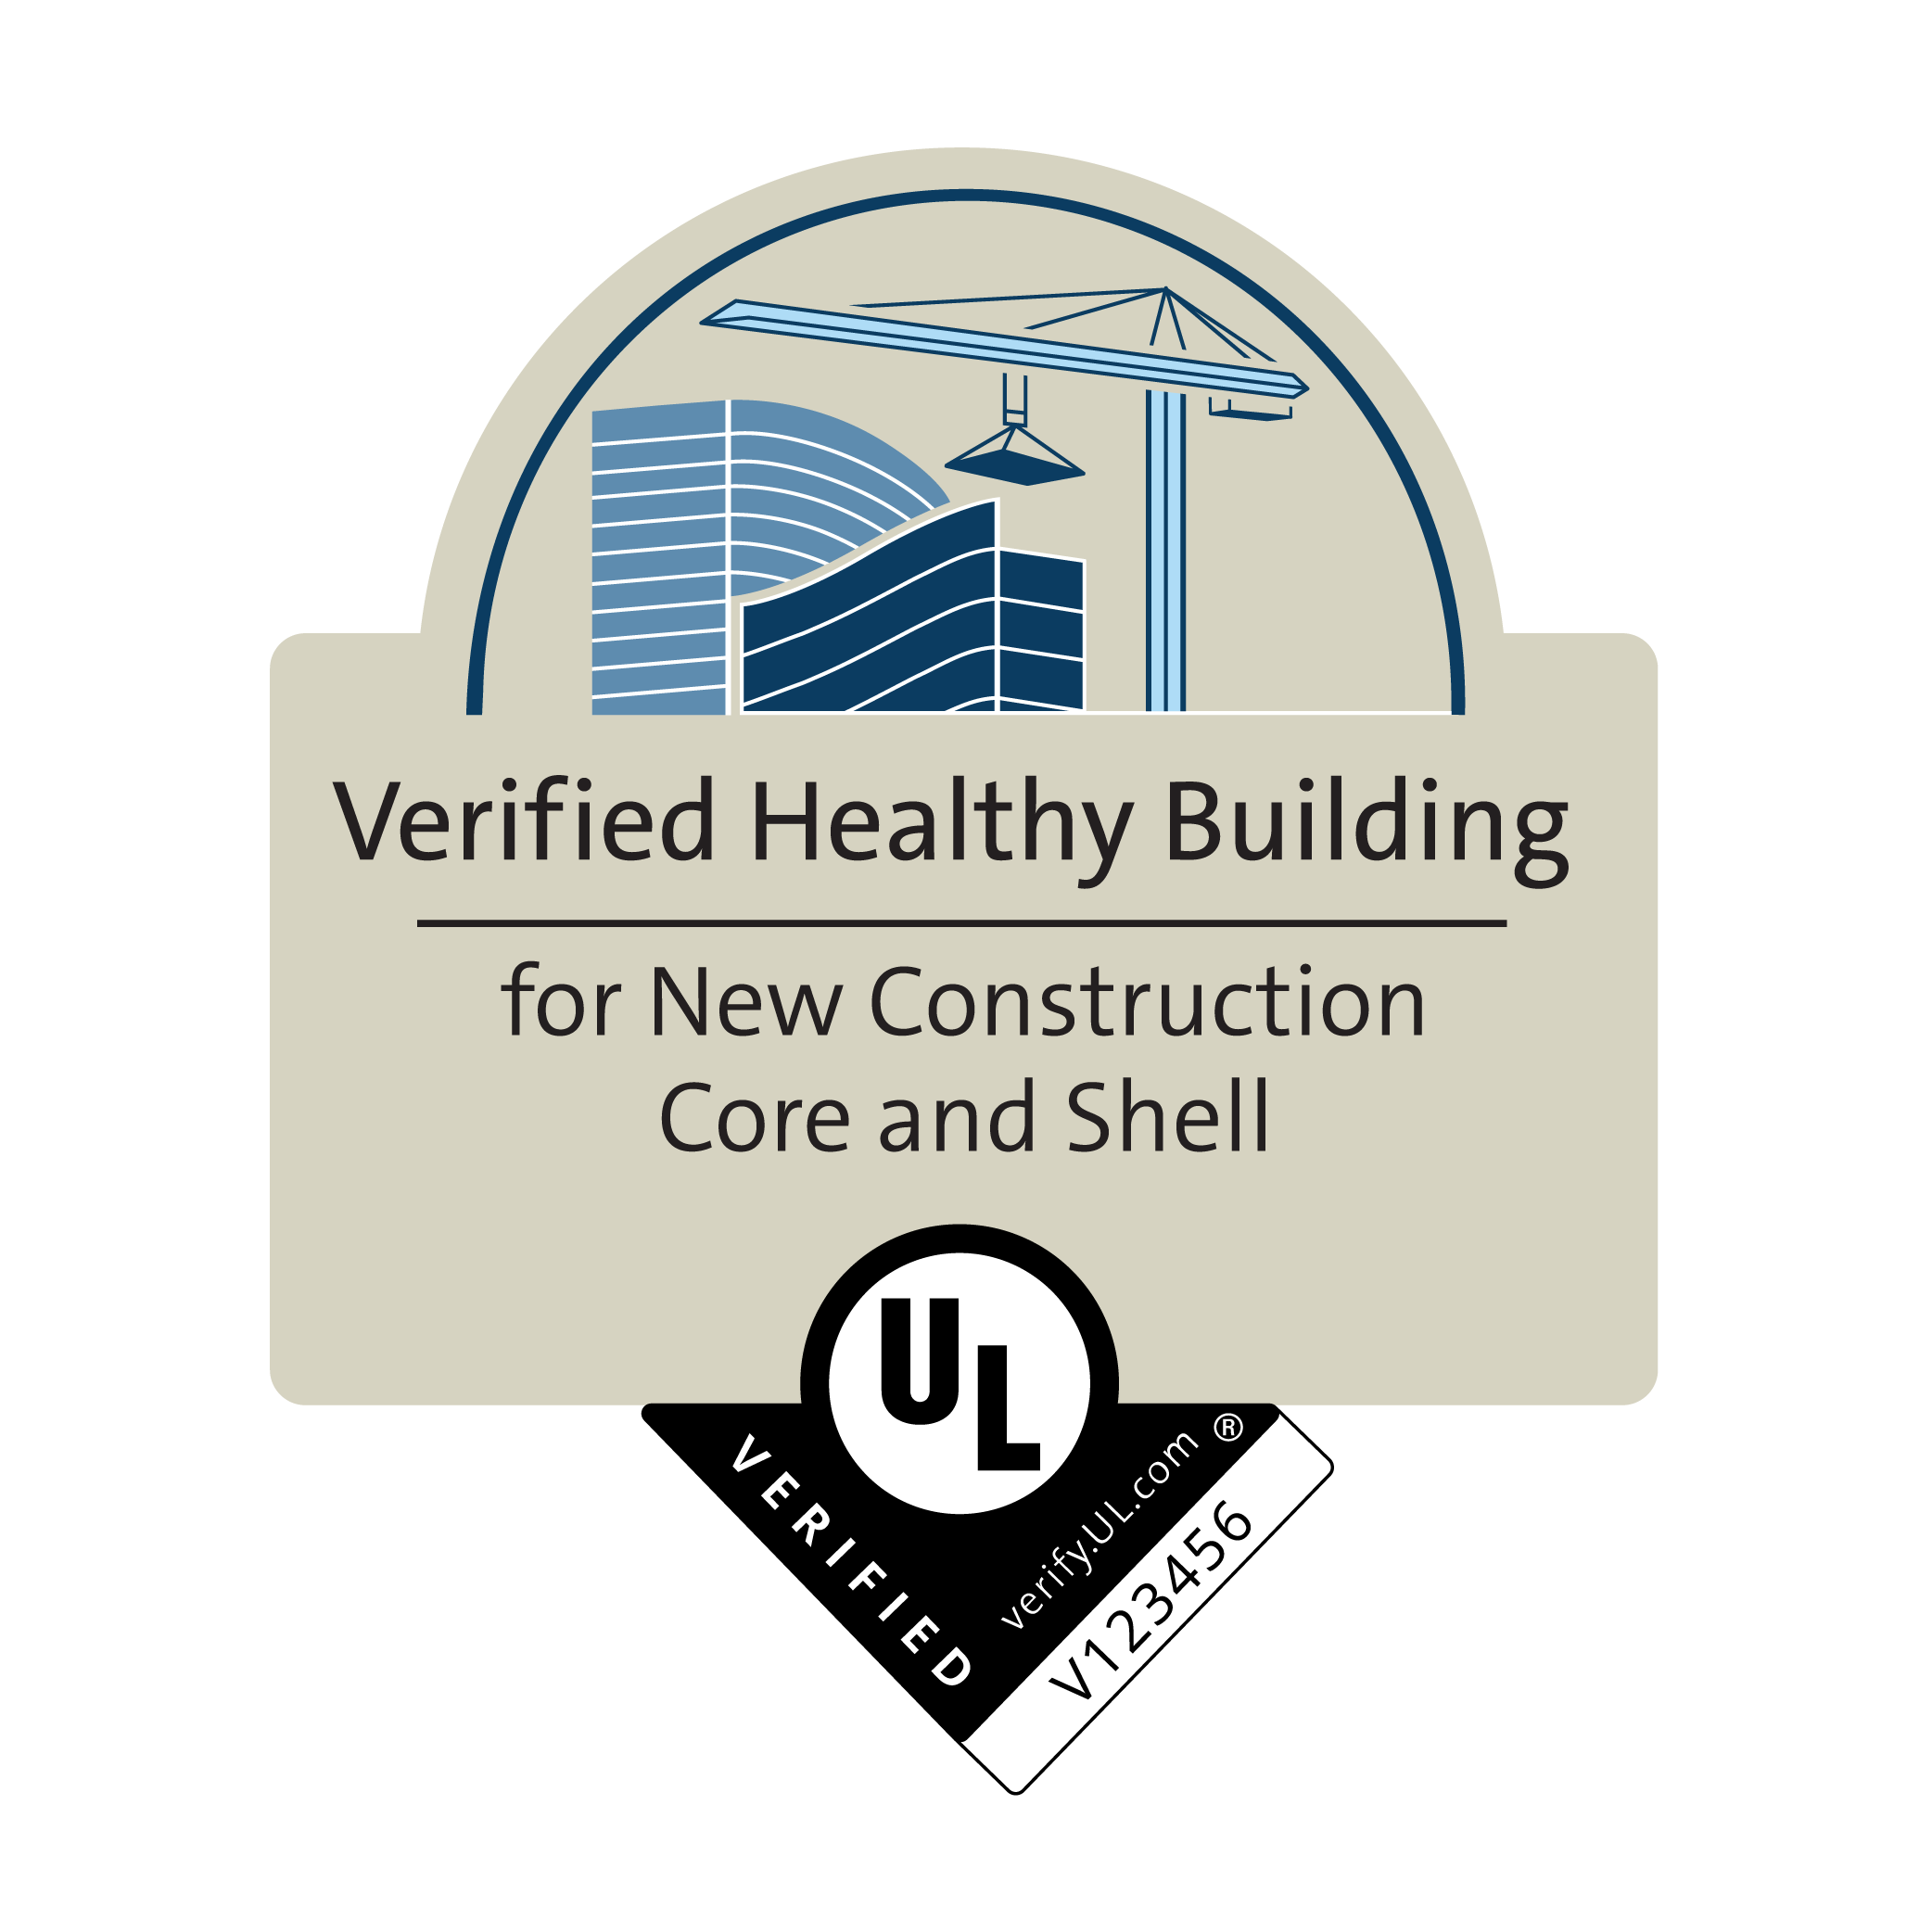 UL Verified Healthy Building for New Construction Core and Shell Verification Mark